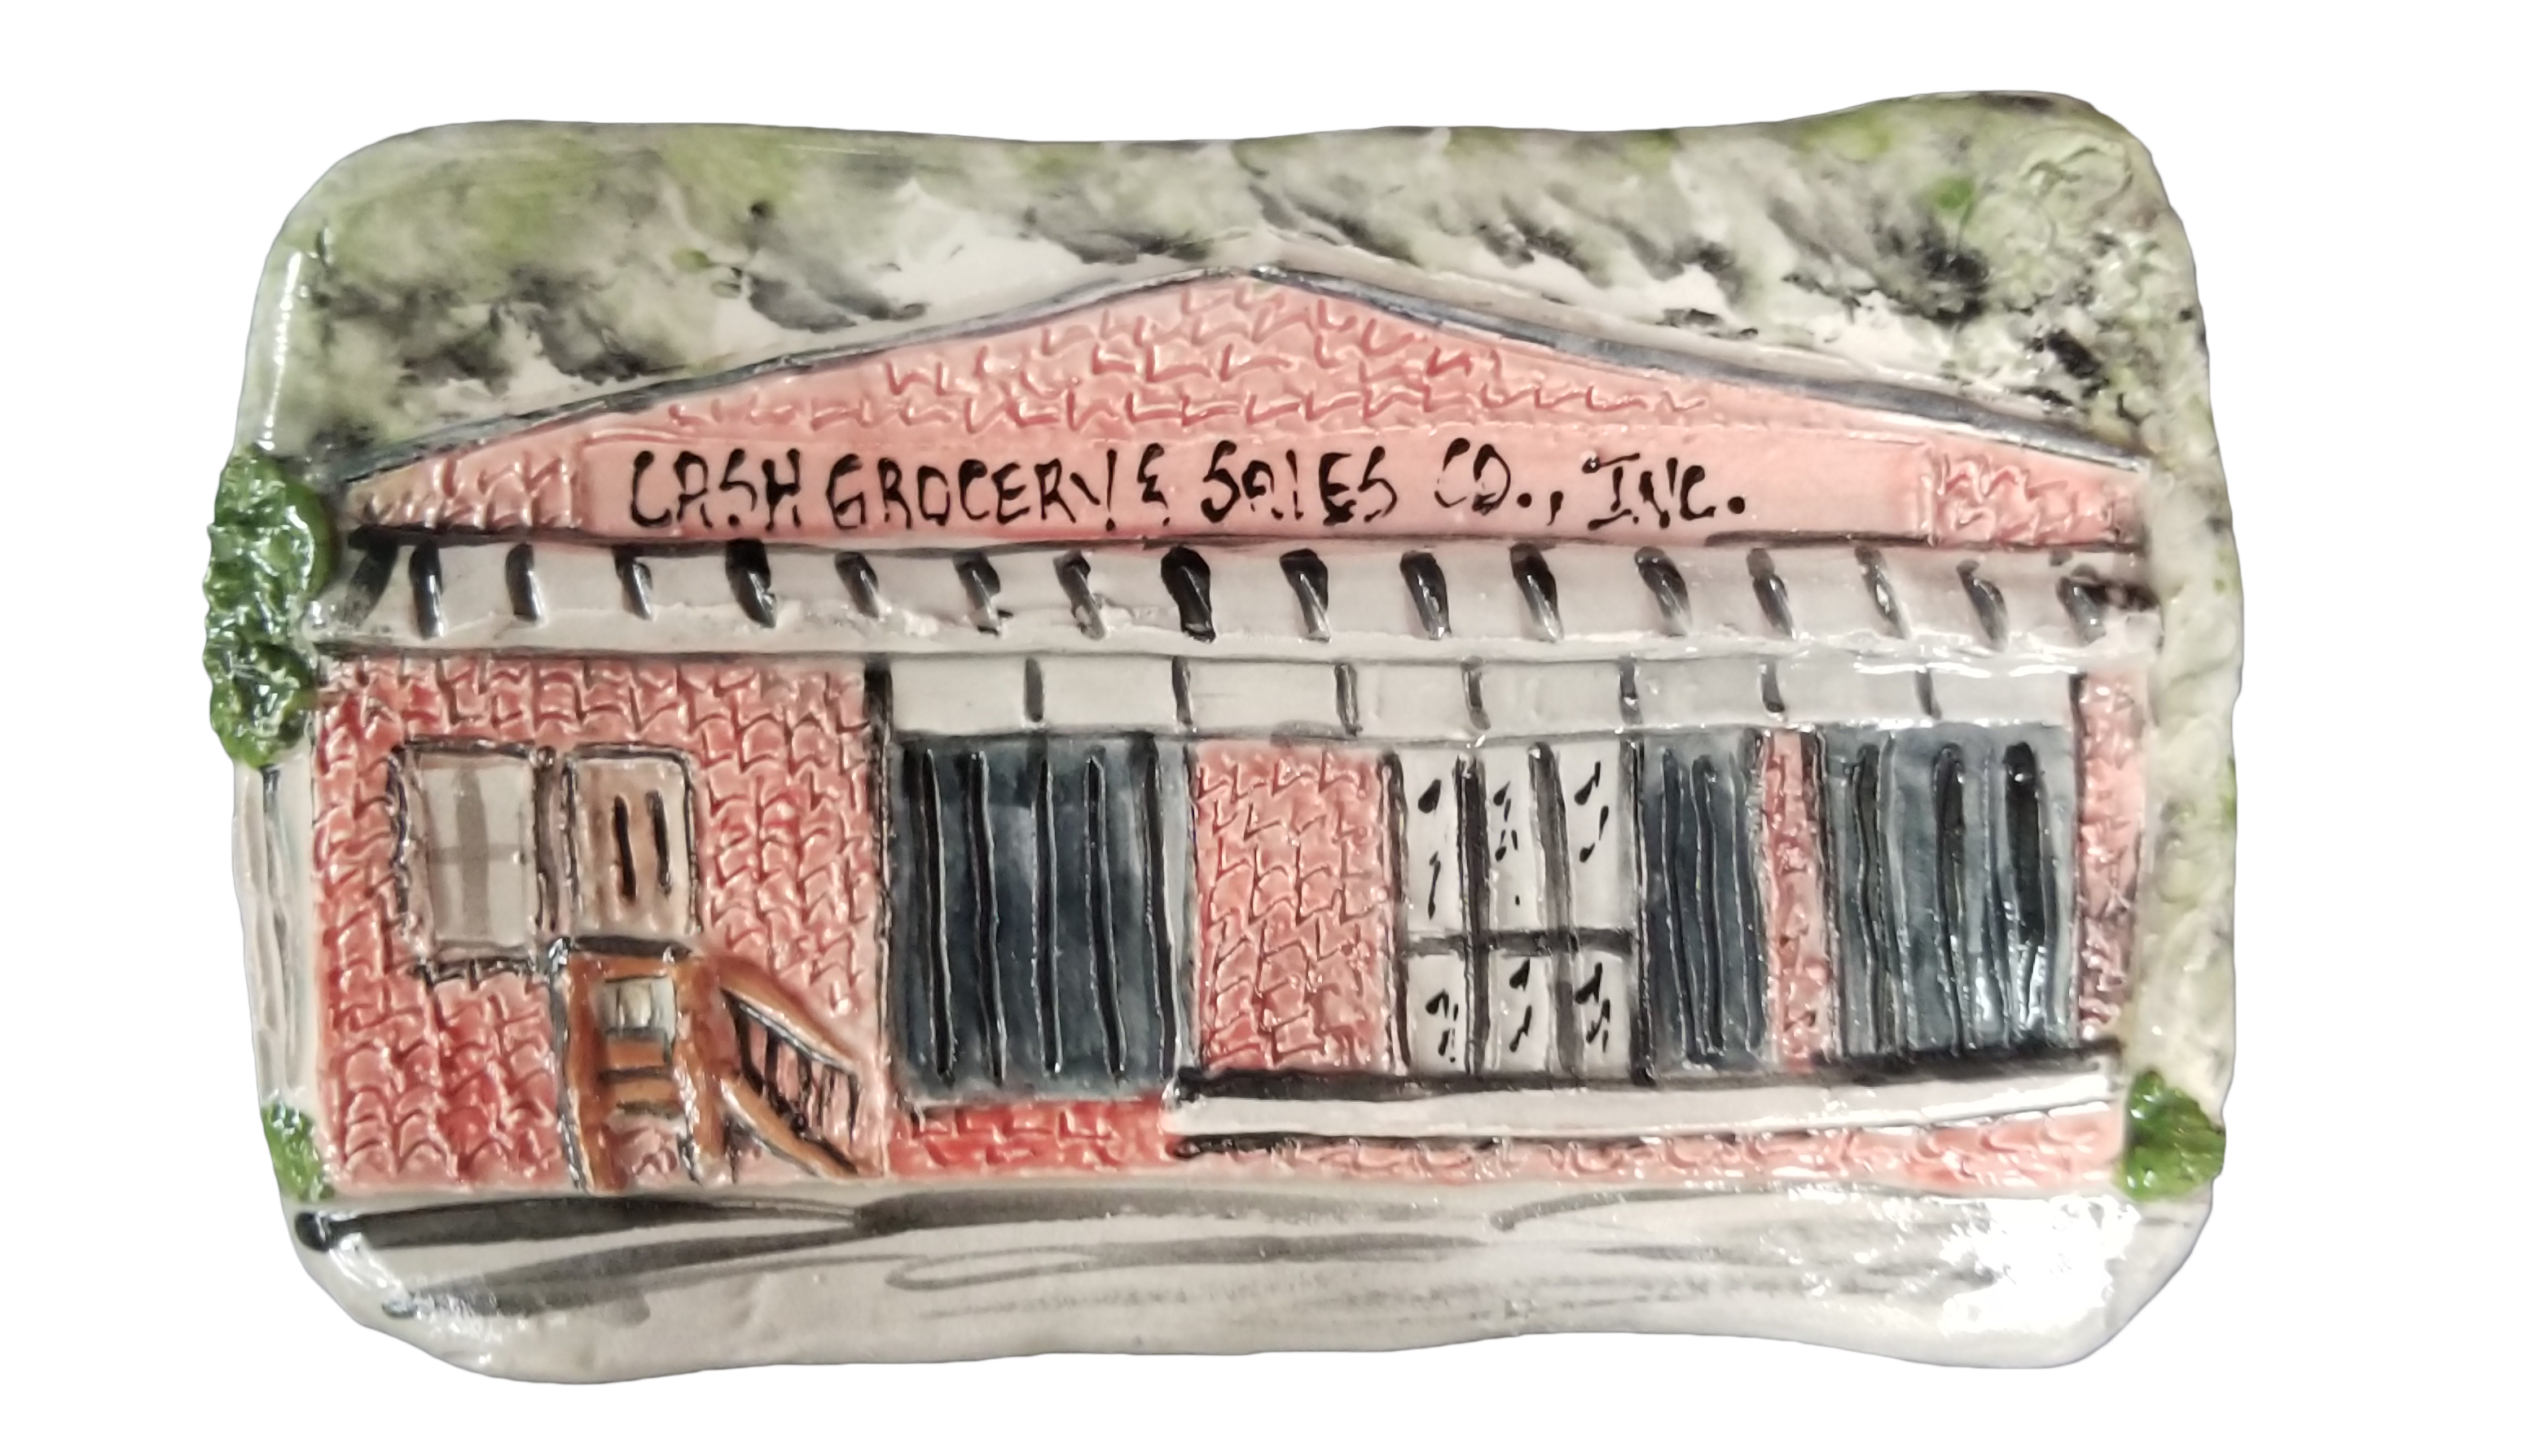 Cash Grocery & Sales Co.